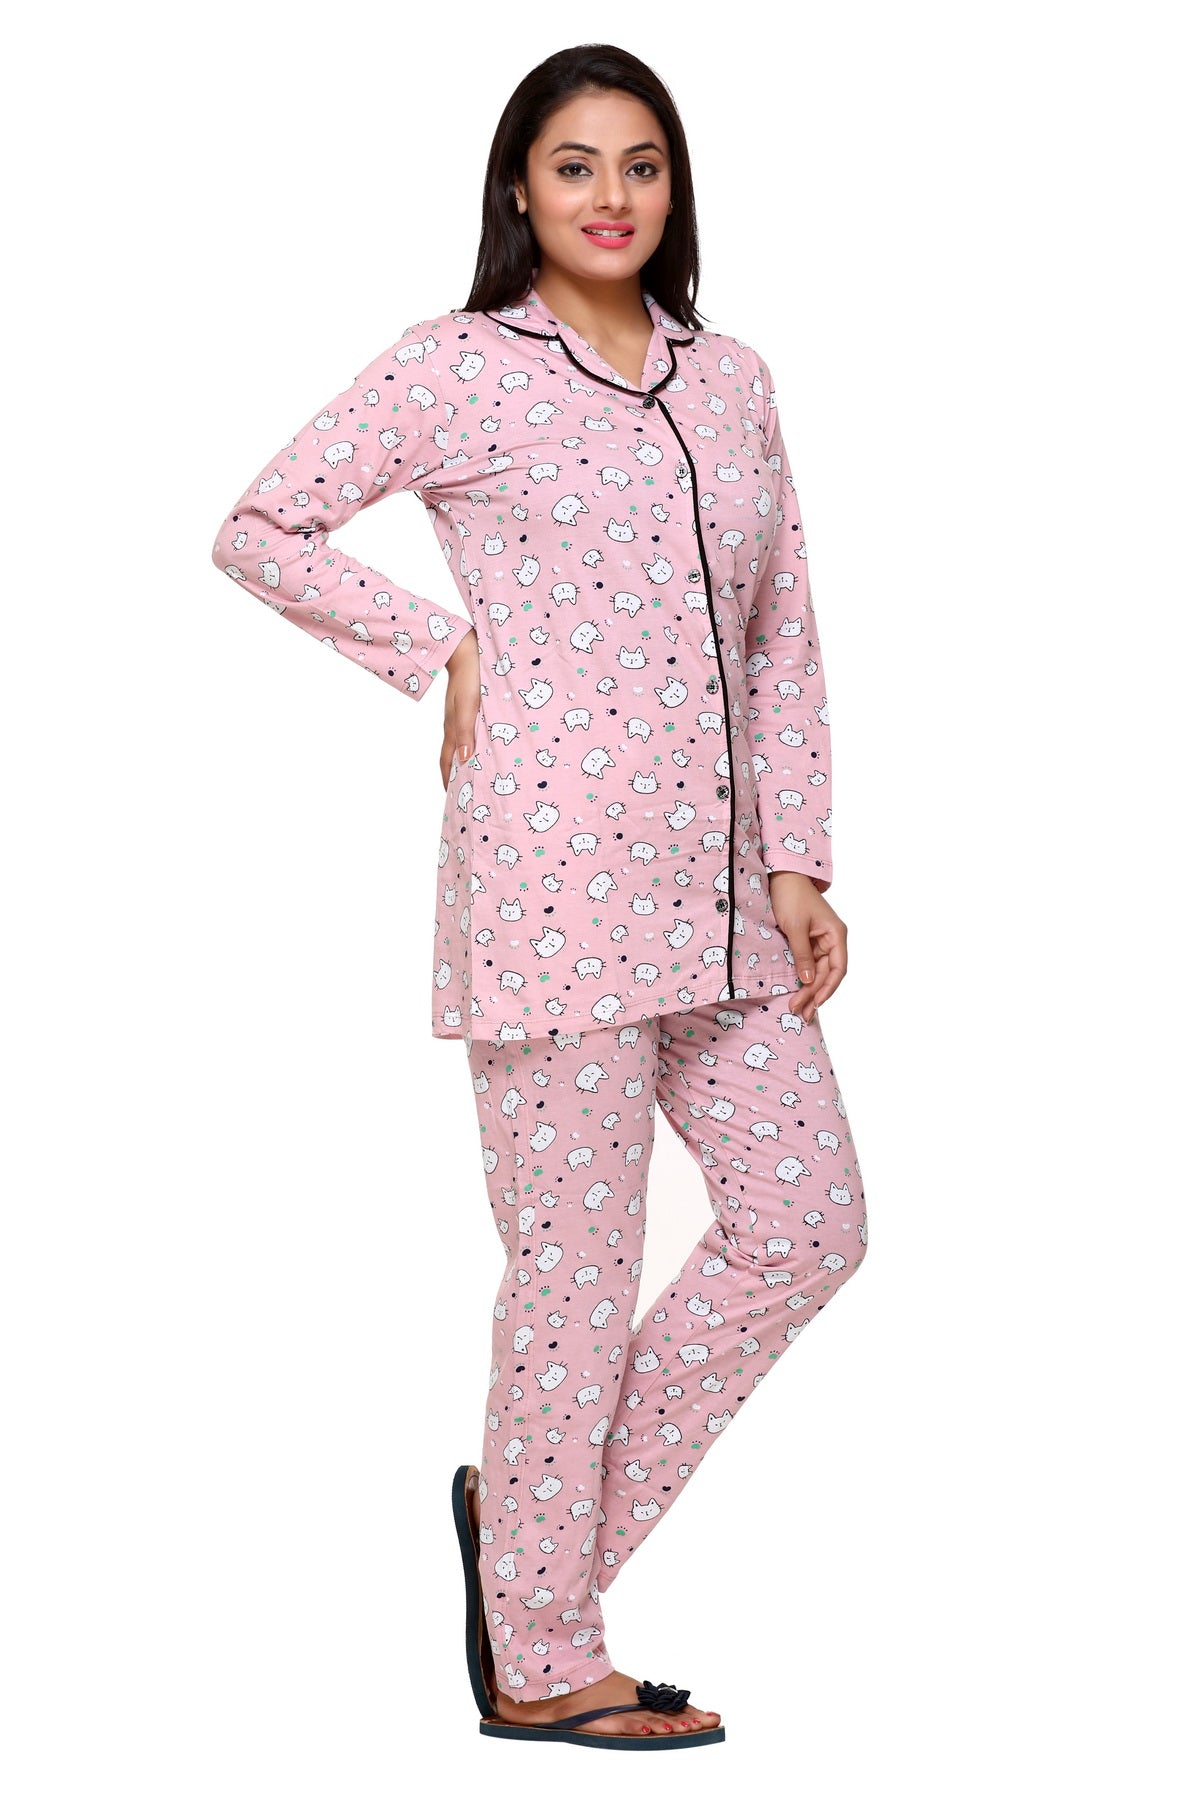 CUPID Full Sleeves Cotton Printed Night Suit Set ( Pink) freeshipping - Cupid Clothings